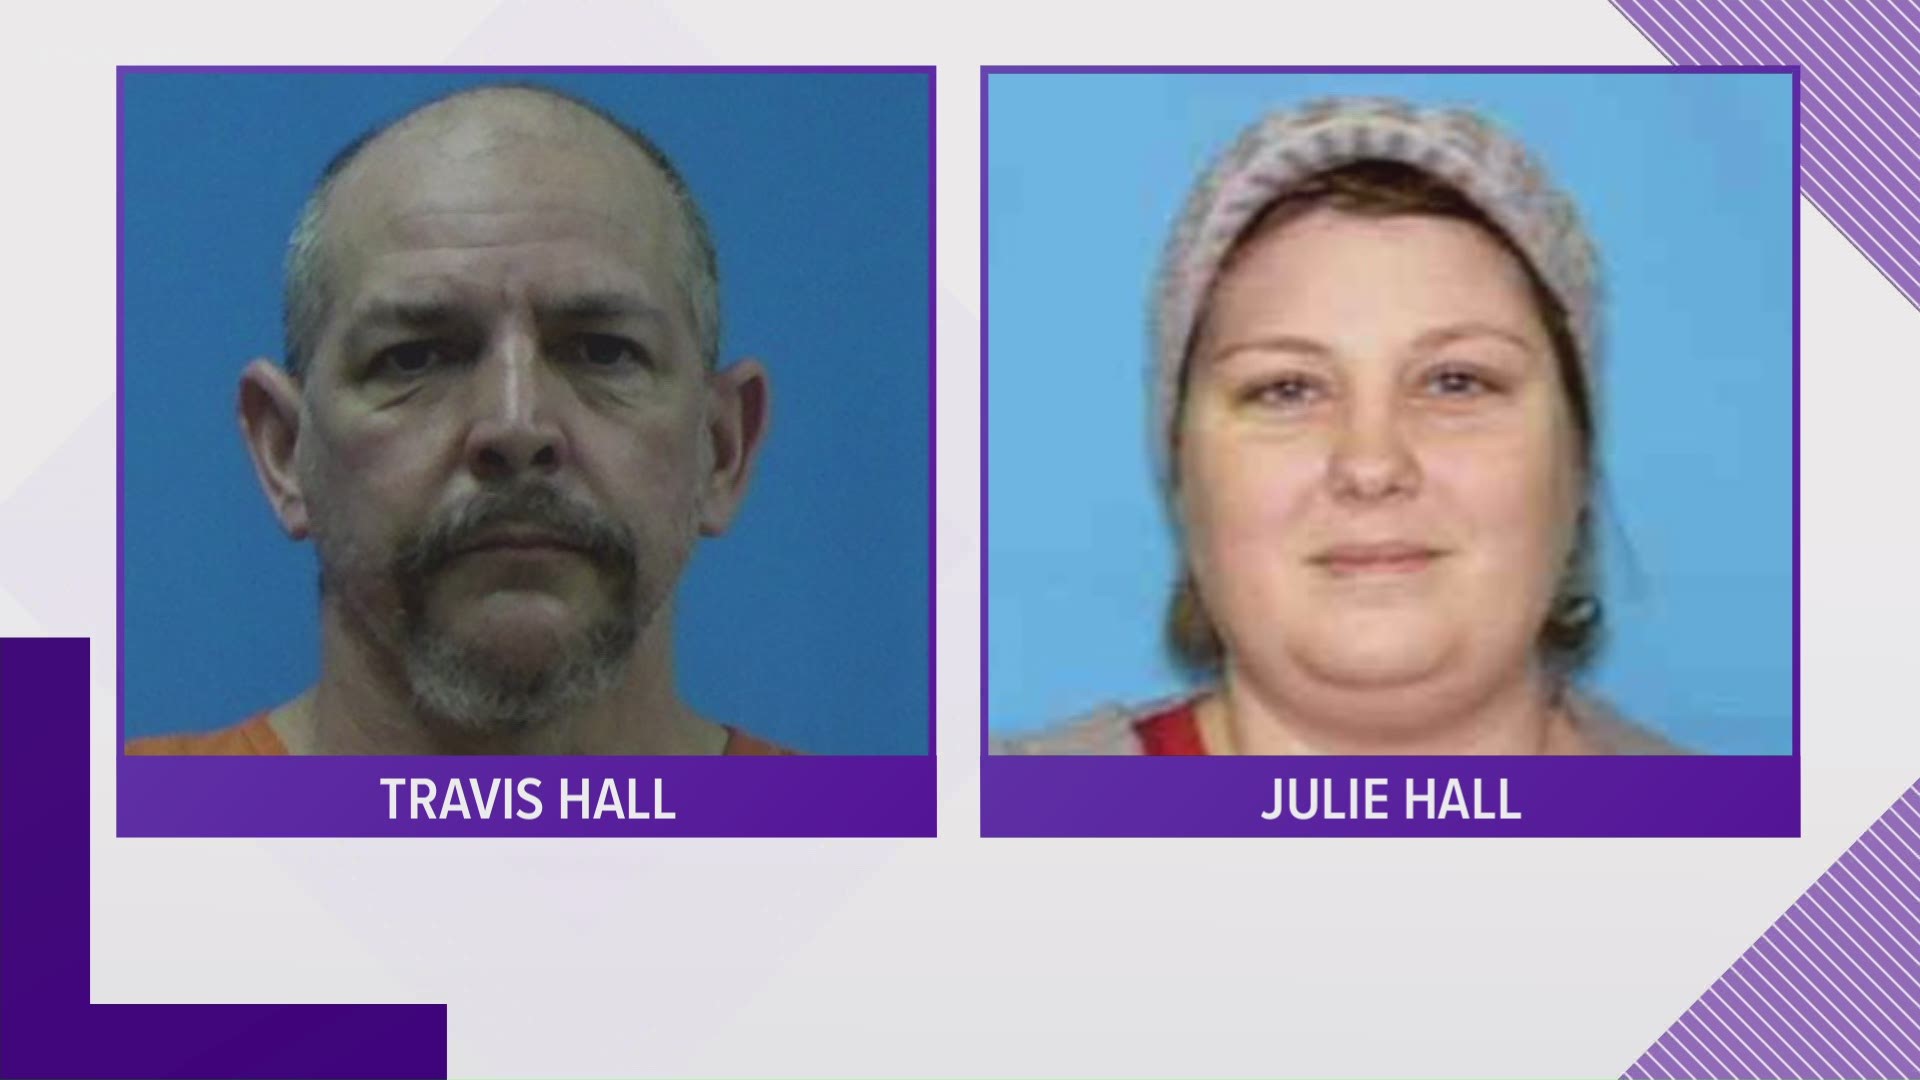 Julie Hall was reported missing in February 2020. Her husband, Travis Hall, was initially arrested for tampering with evidence. Julie's body has not been found.